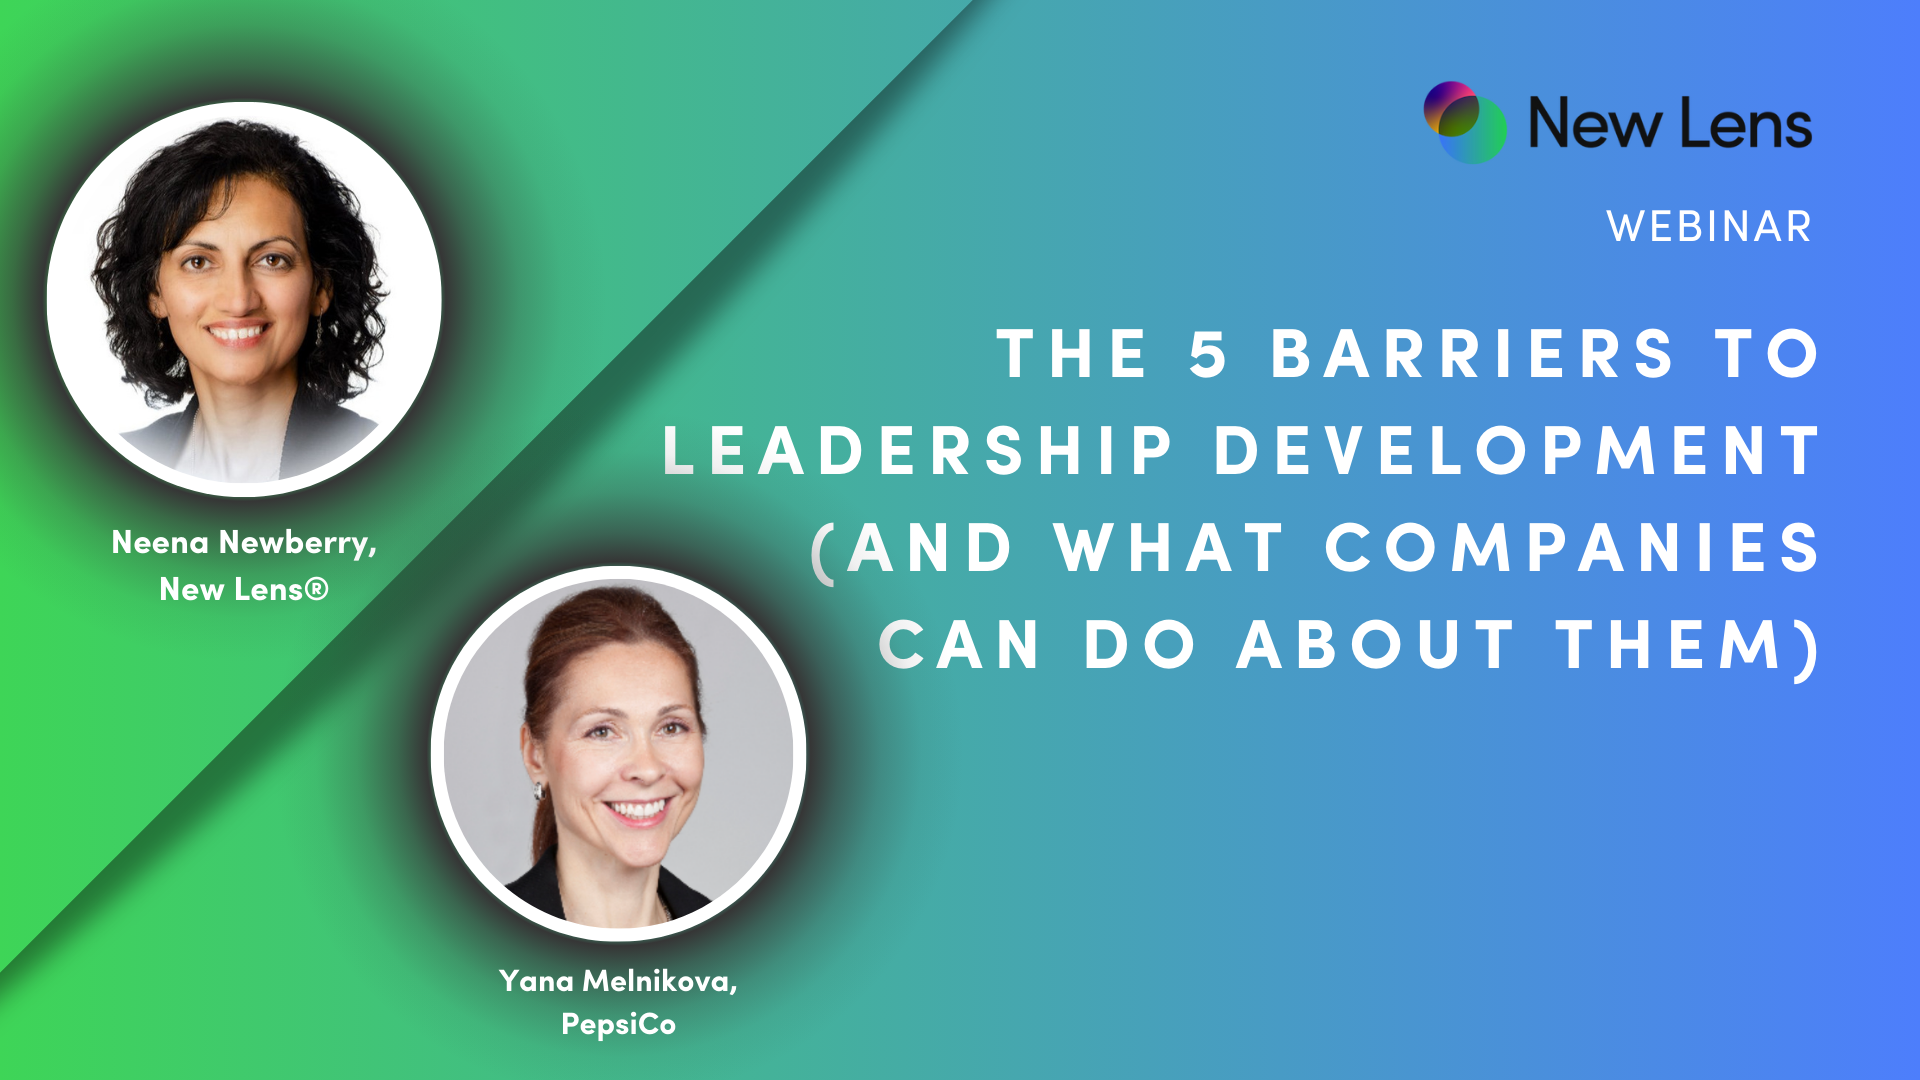 The 5 Barriers to Leadership Development